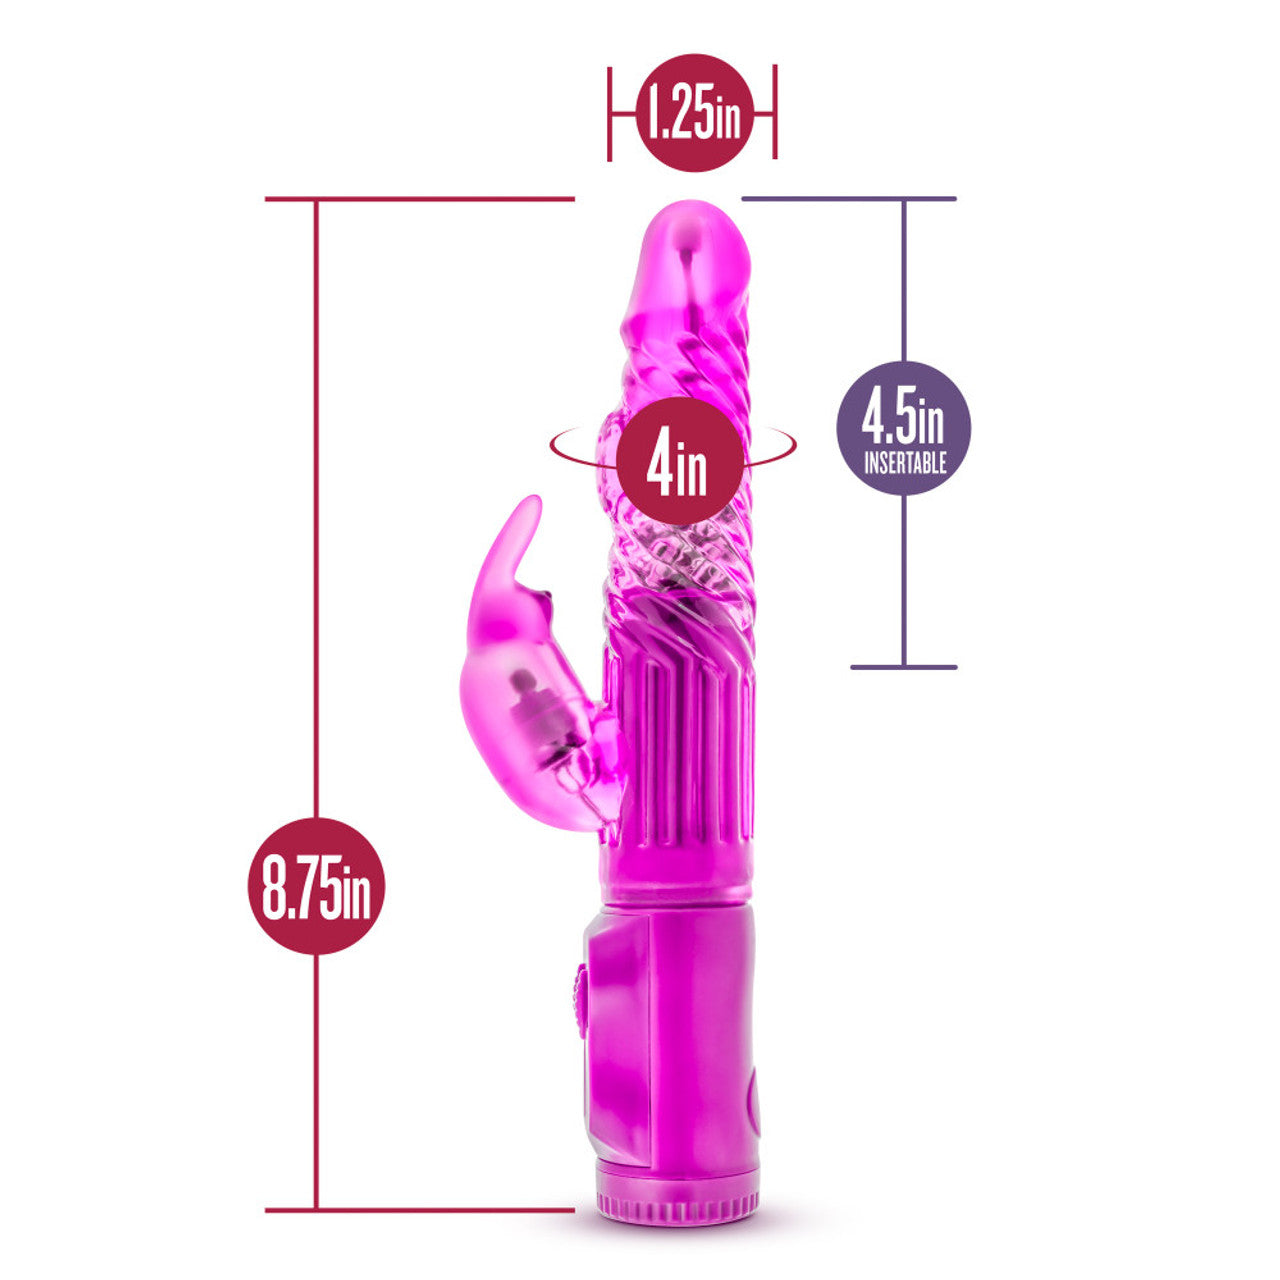 B Yours Beginner's Bunny - Pink - Thorn & Feather Sex Toy Canada